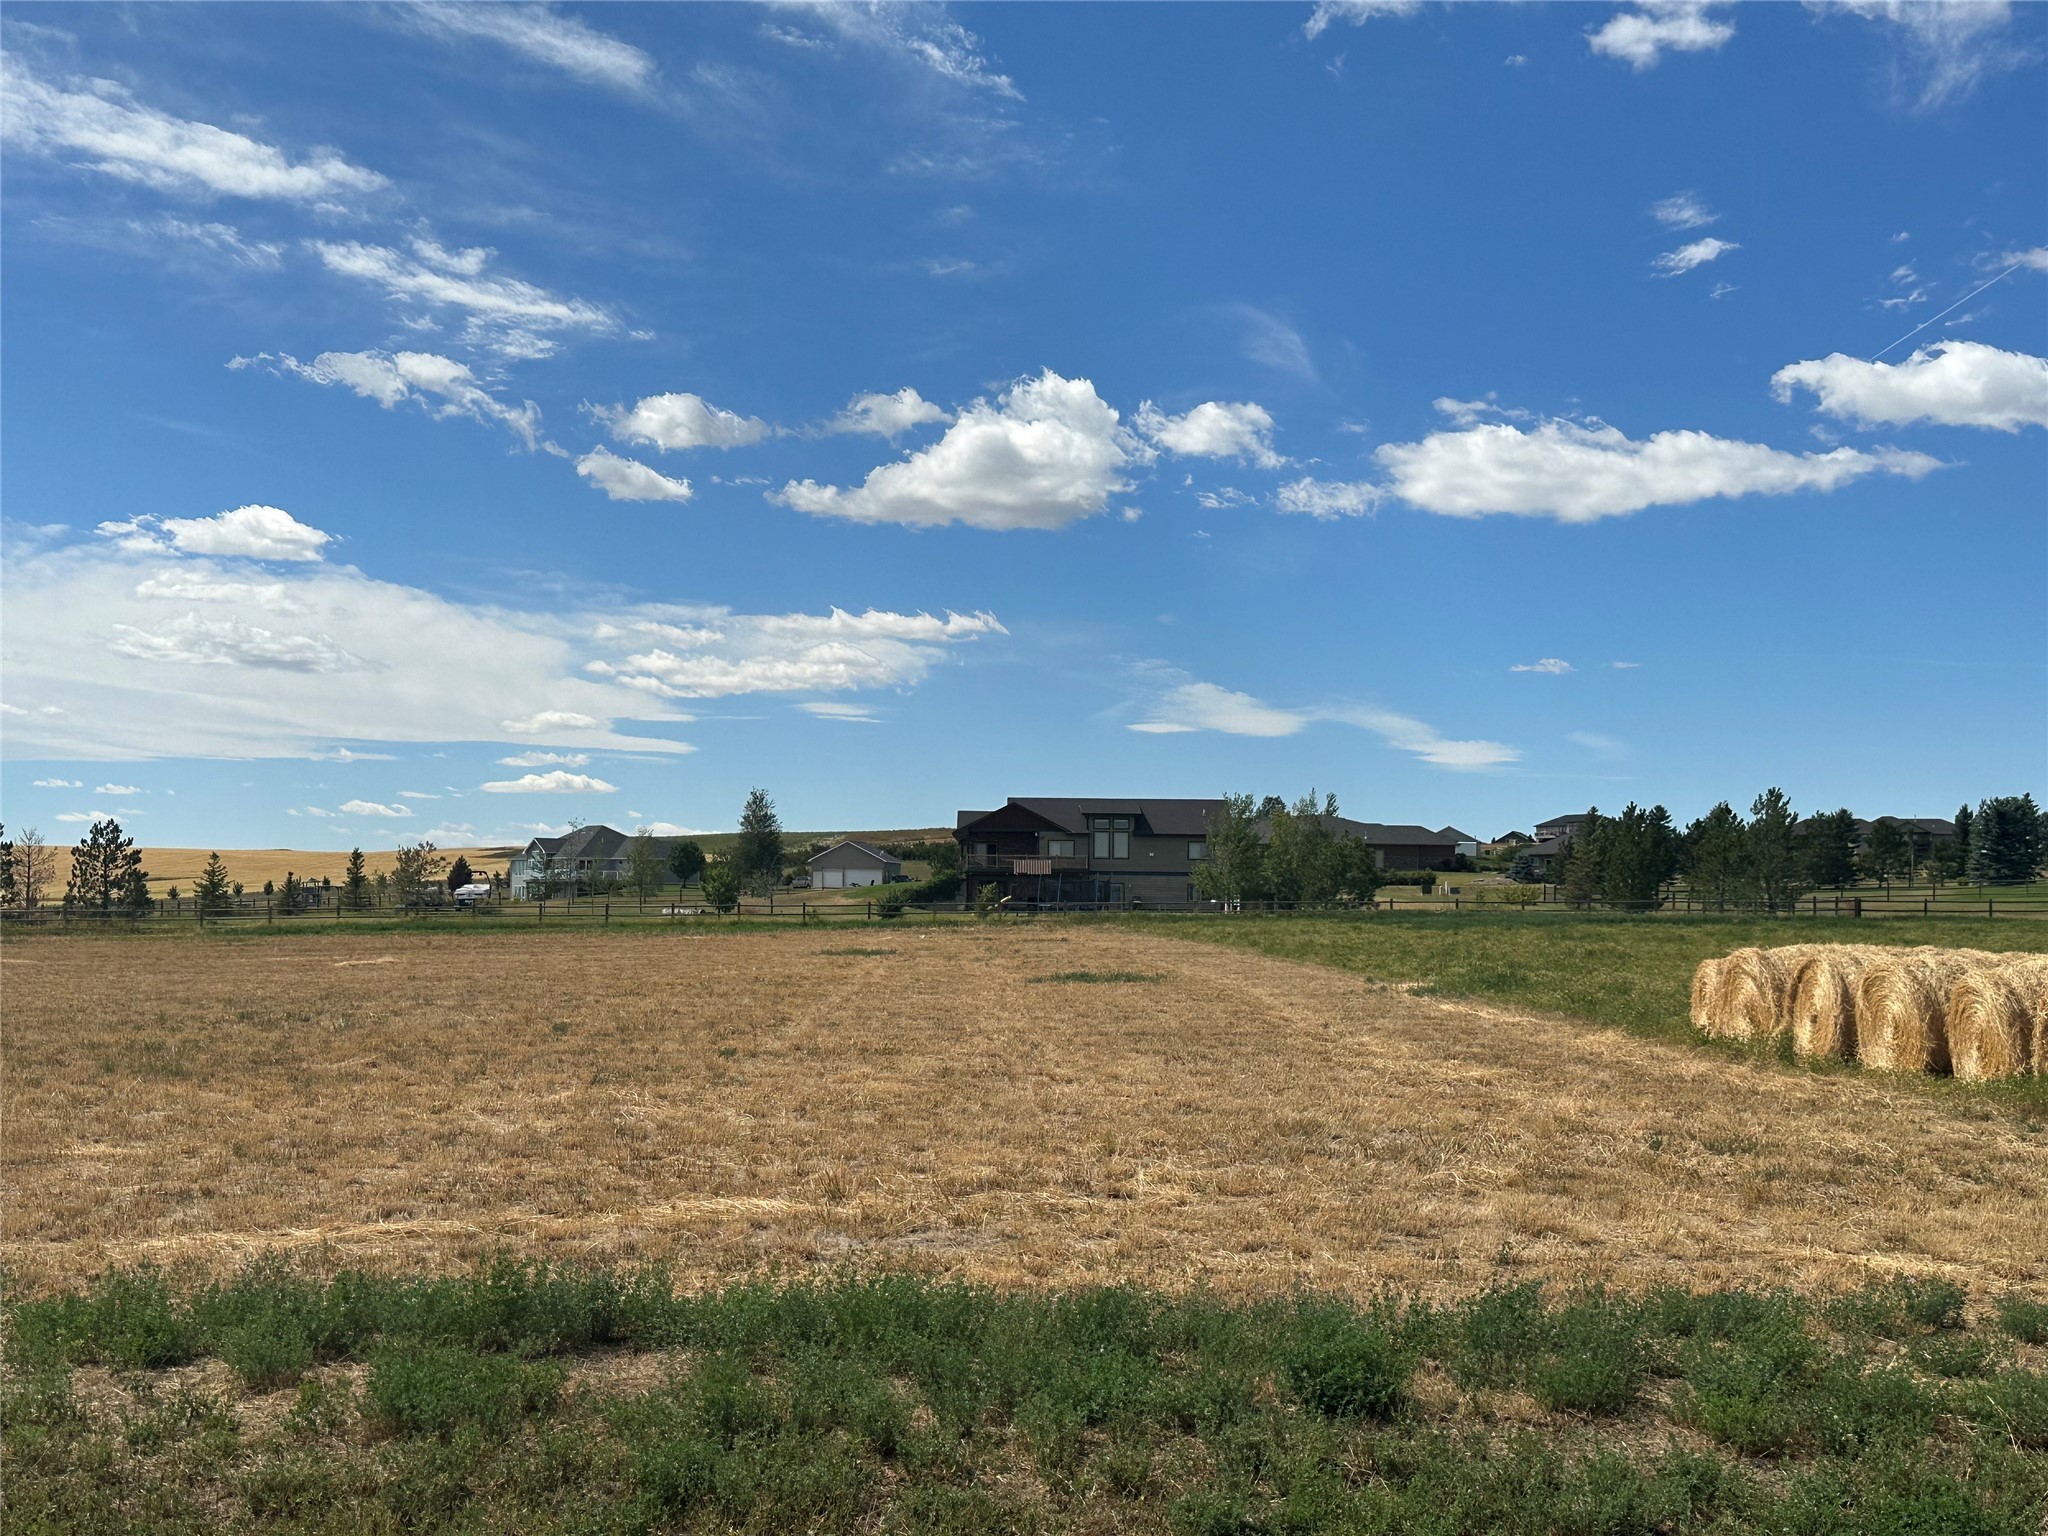 BUILD YOUR DREAM HOME...
Developed, private community close to Great Falls. Big Sky Views of the Little Belt and Highwood mountains. This 2.08 acre Foothills property has electric, gas, and internet accessibility. Bring your vision and make it your own.
Listed by Terral Black